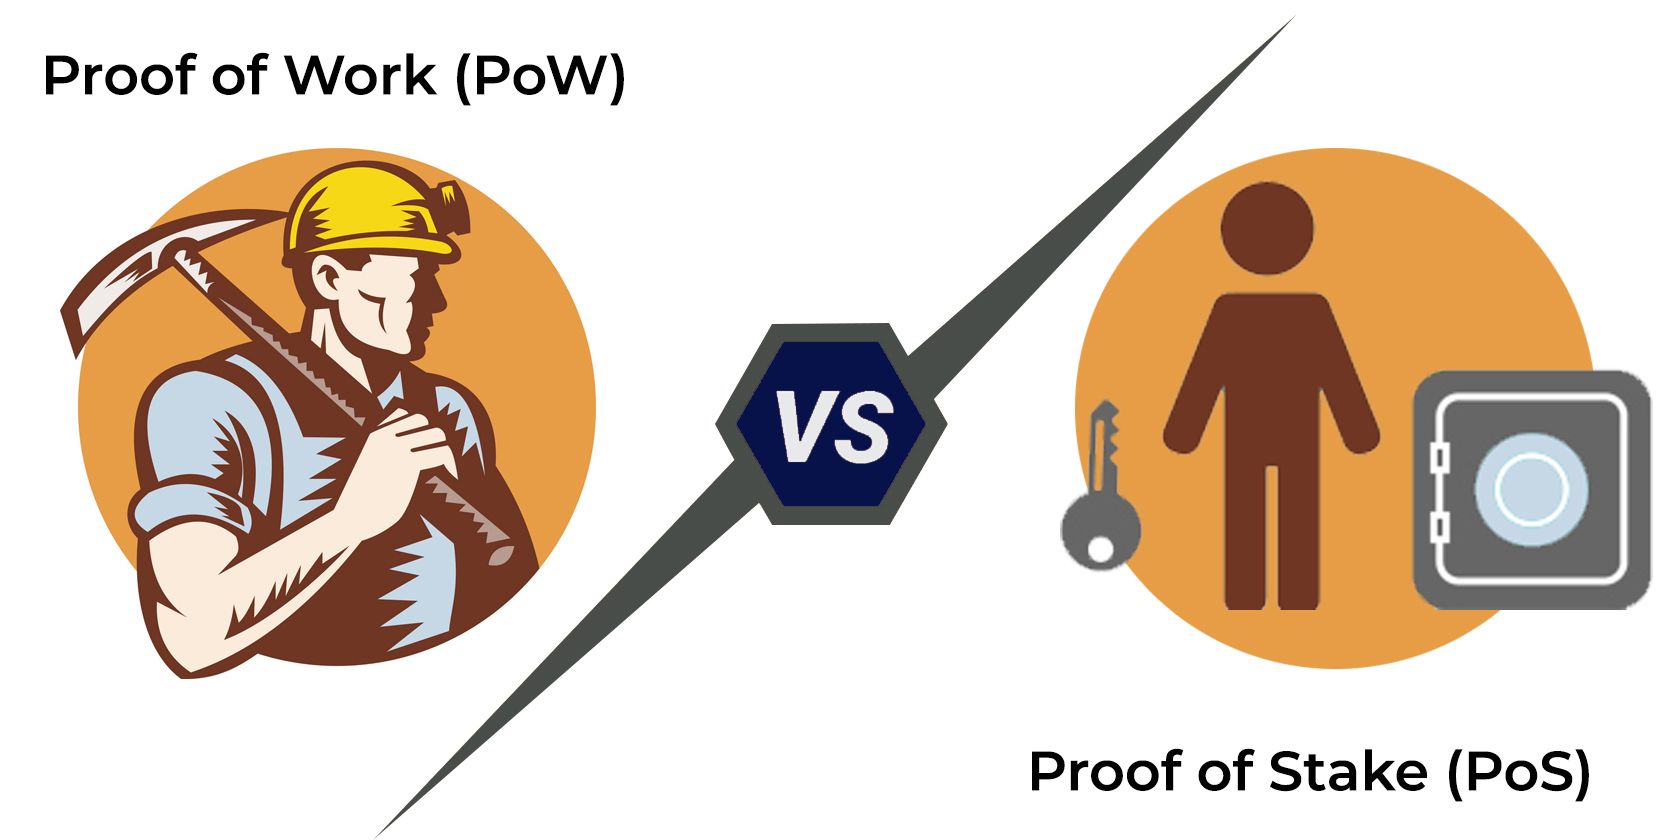 What is meant by proof of work (PoW) and proof of stake (PoS) in